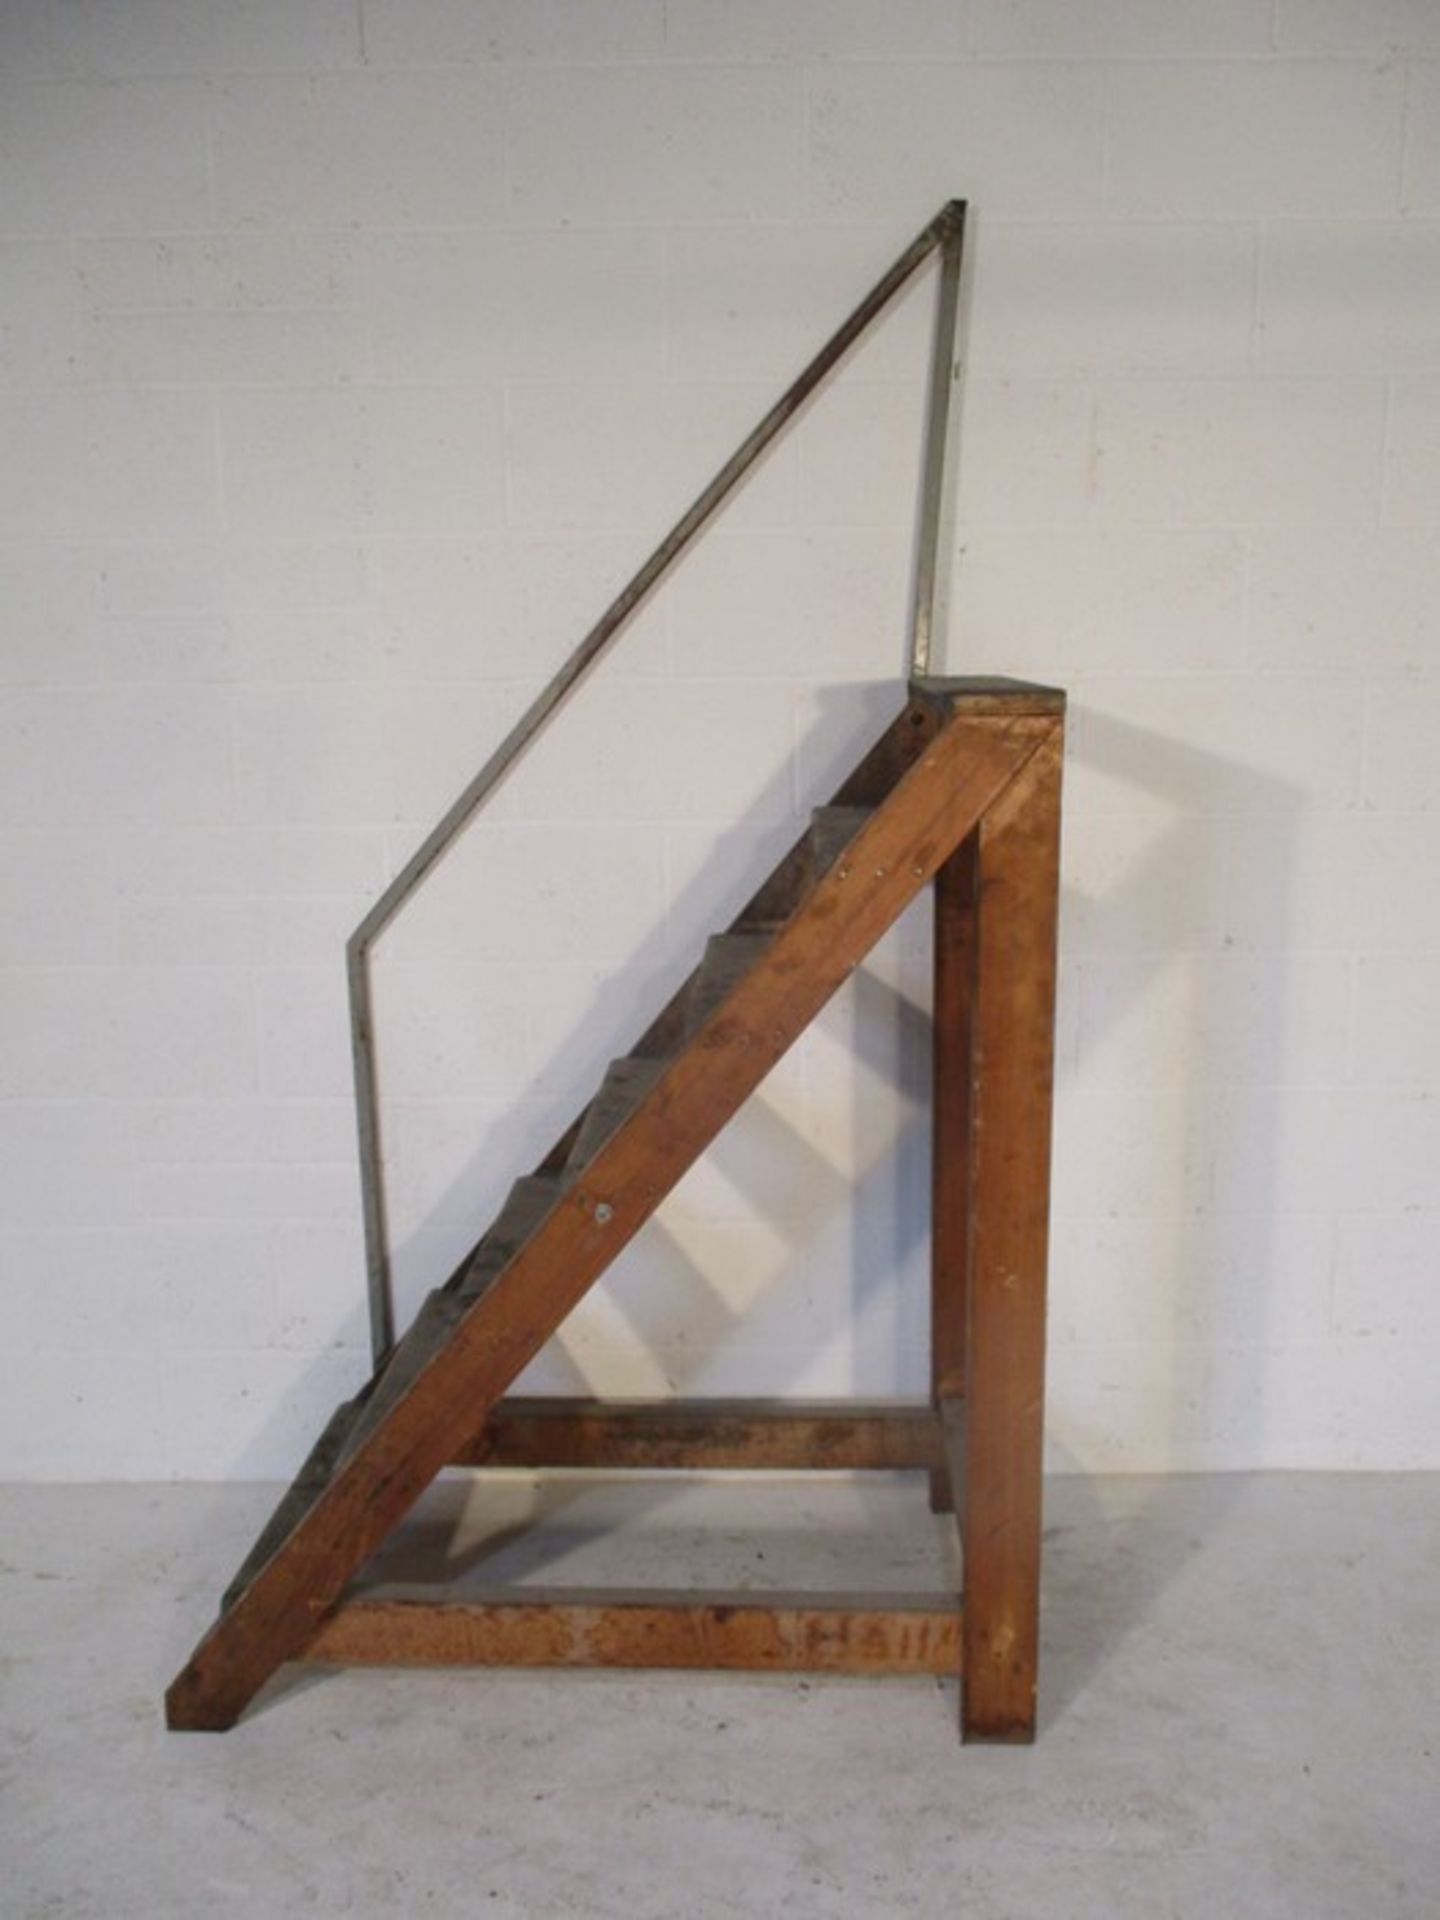 A set of industrial steps with rail, overall height 208 cm